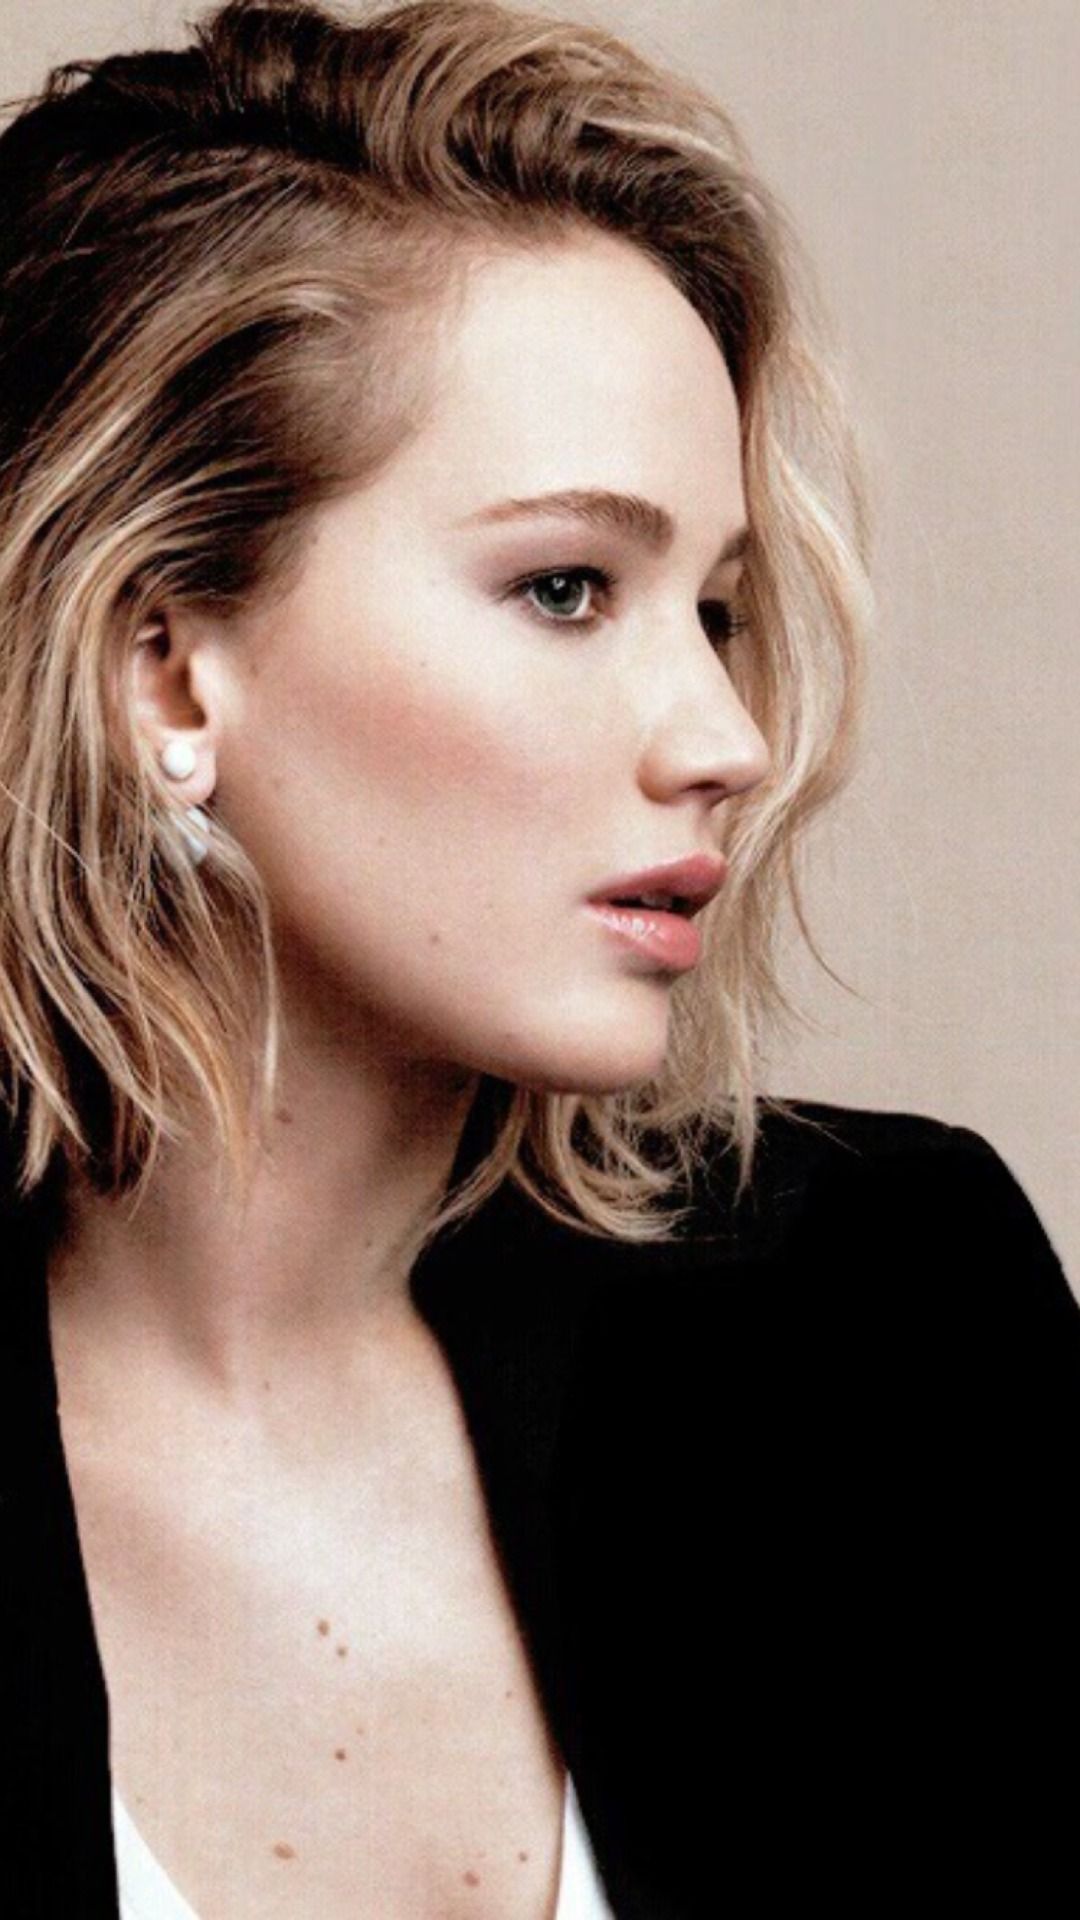 Jennifer Lawrence iPhone Wallpaper with high-resolution 1080x1920 pixel. You can use this wallpaper for your iPhone 5, 6, 7, 8, X, XS, XR backgrounds, Mobile Screensaver, or iPad Lock Screen - Jennifer Lawrence